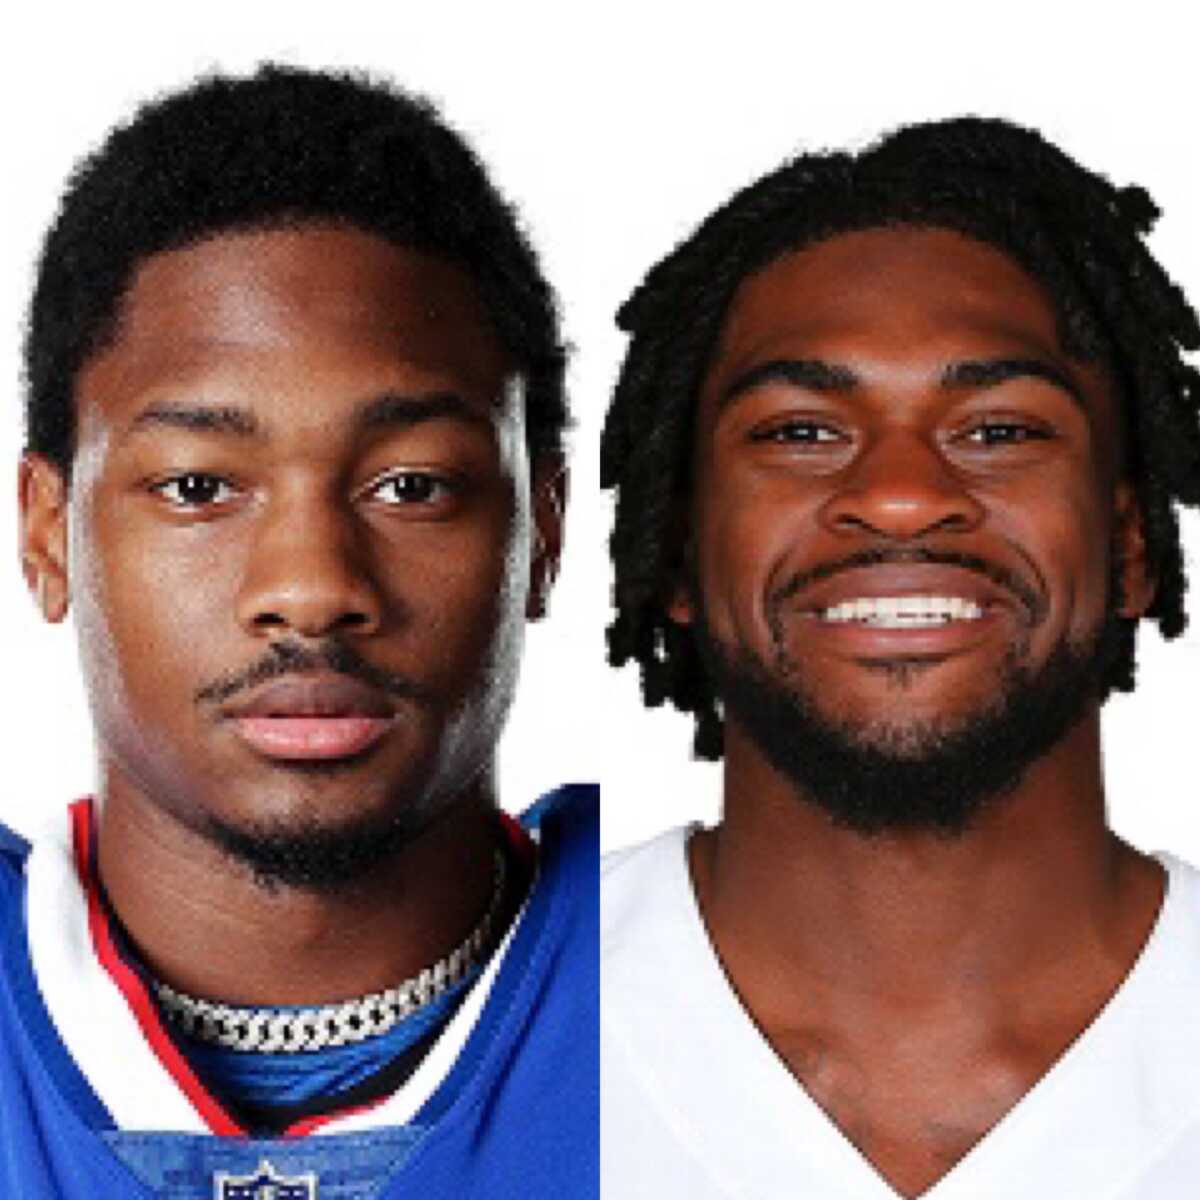 Gaithersburg's Stefon and Trevon Diggs Both Named to the NFL Pro